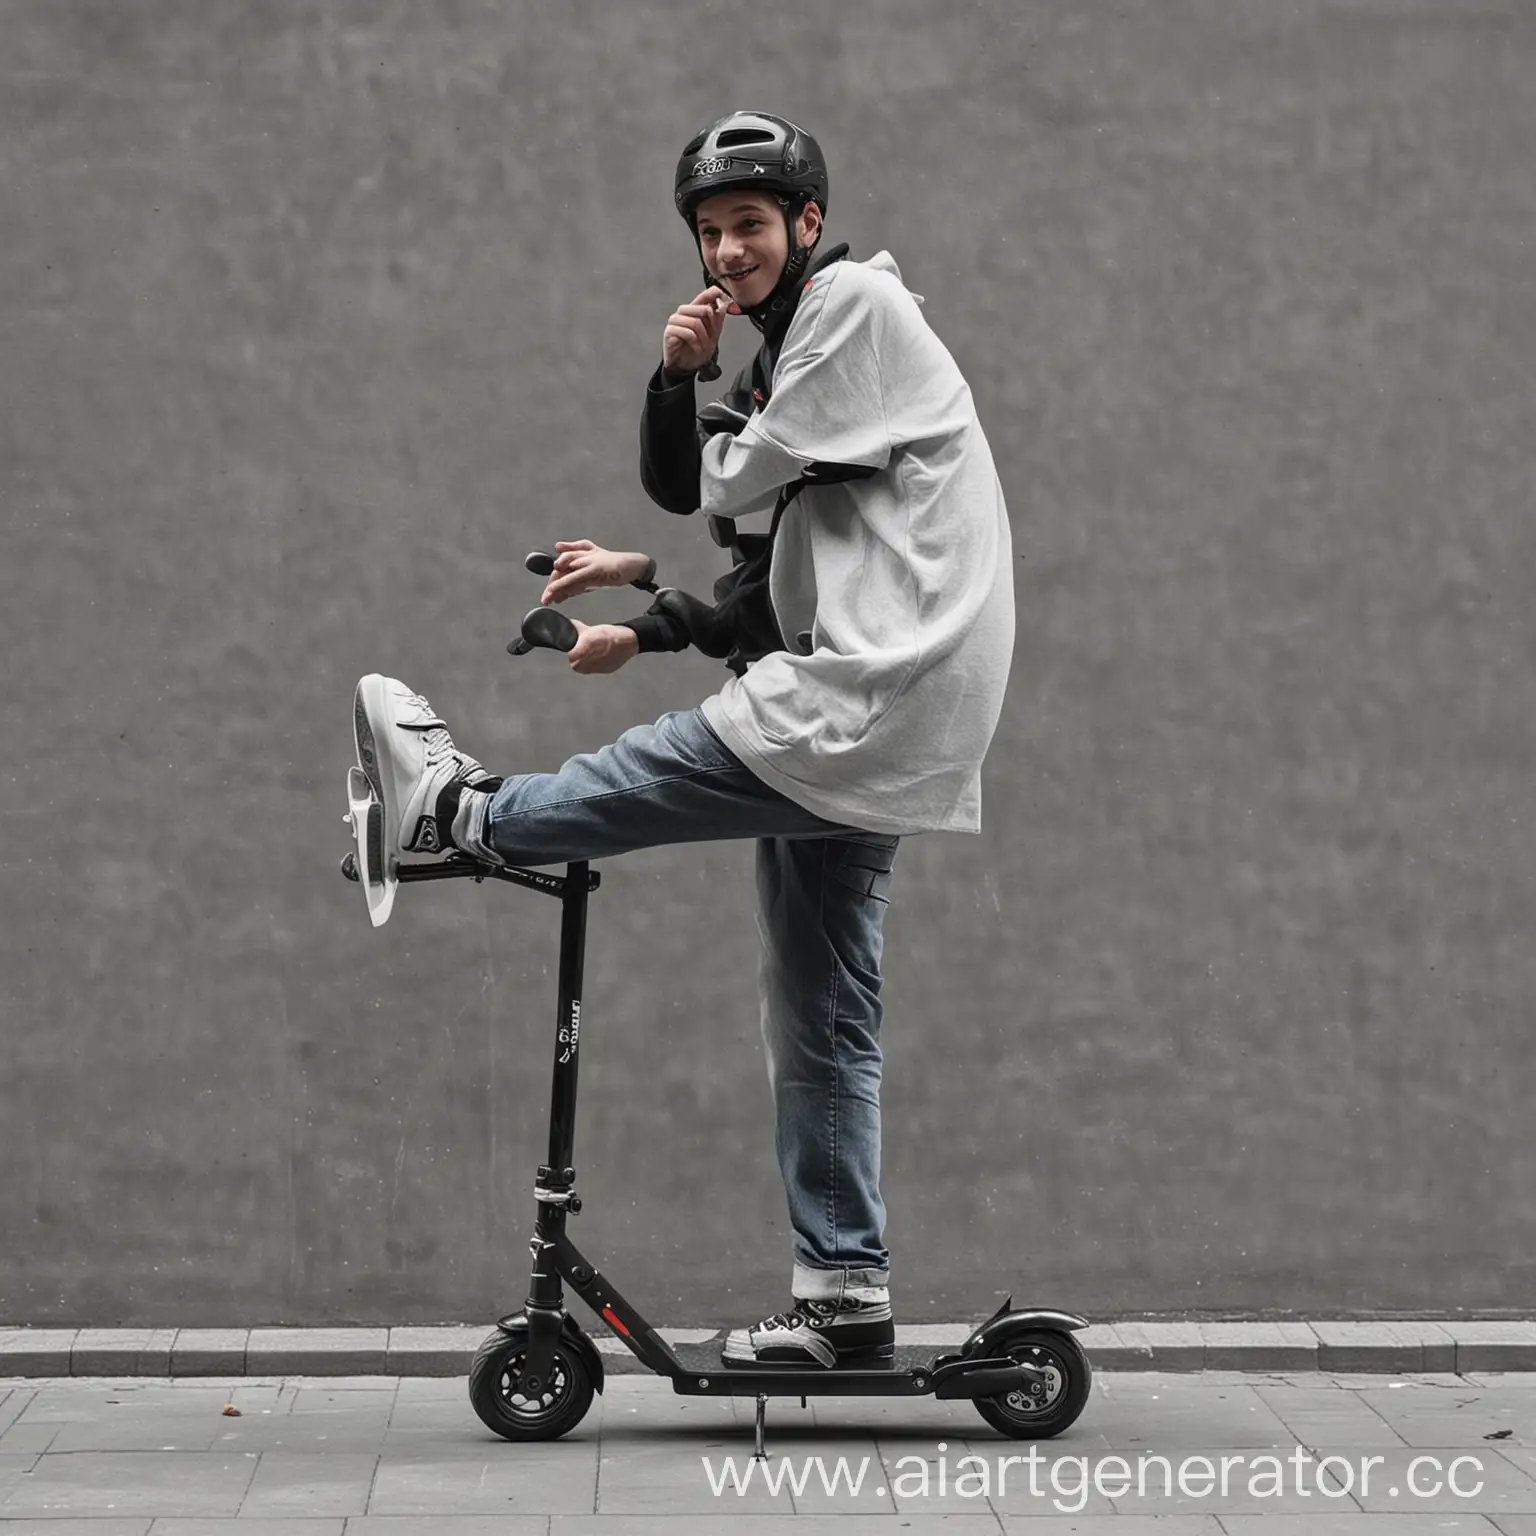 Child-Performing-Scooter-Trick-in-Urban-Setting